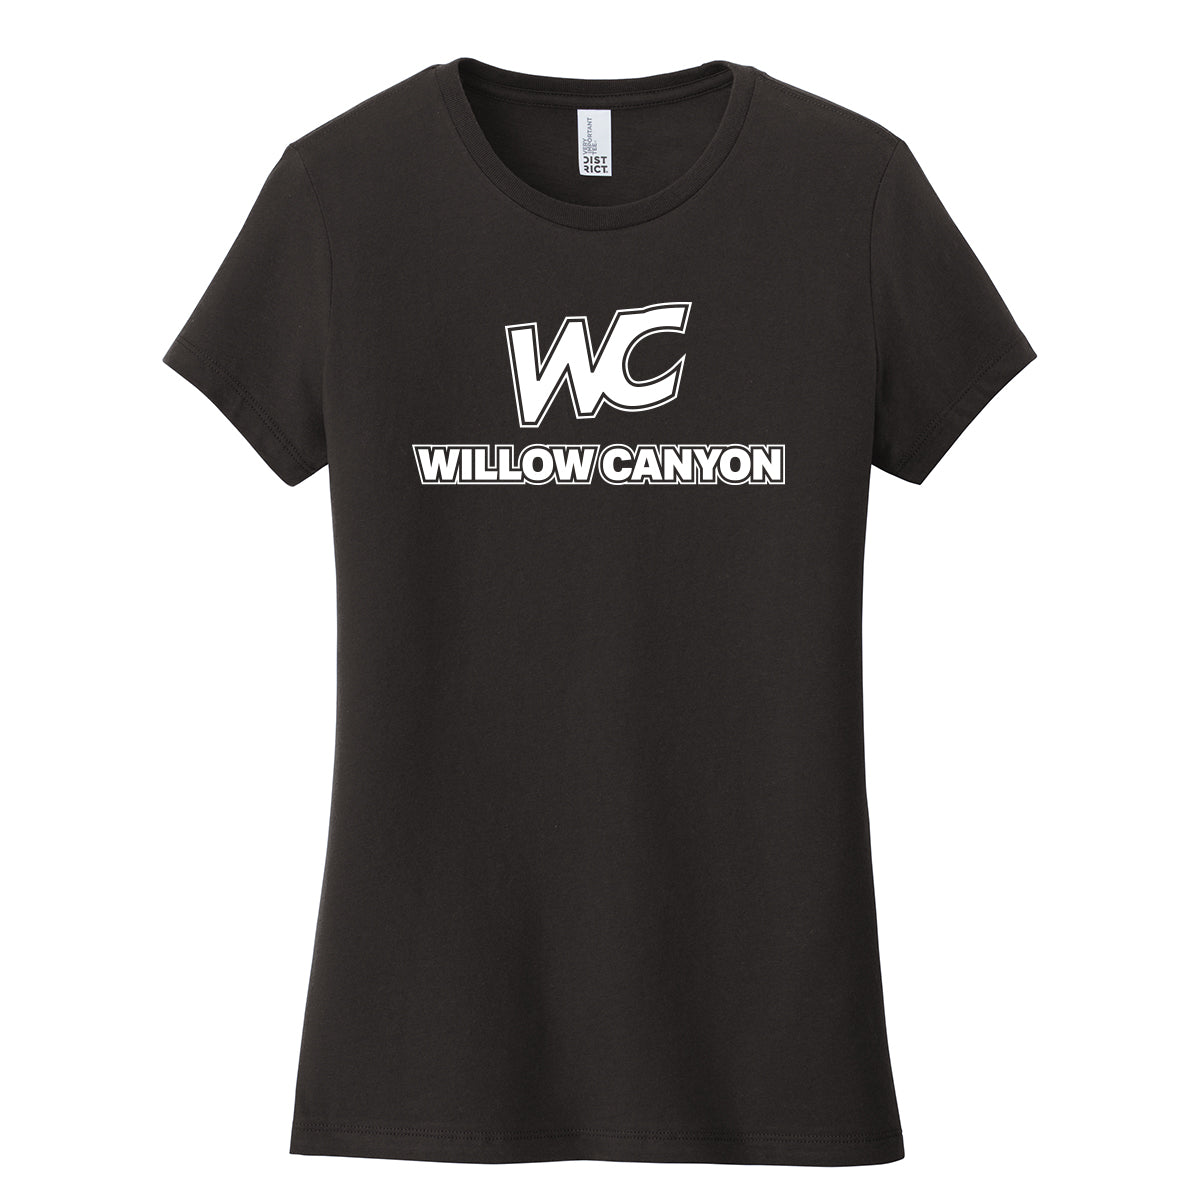 Willow Canyon Women's Fit Tee